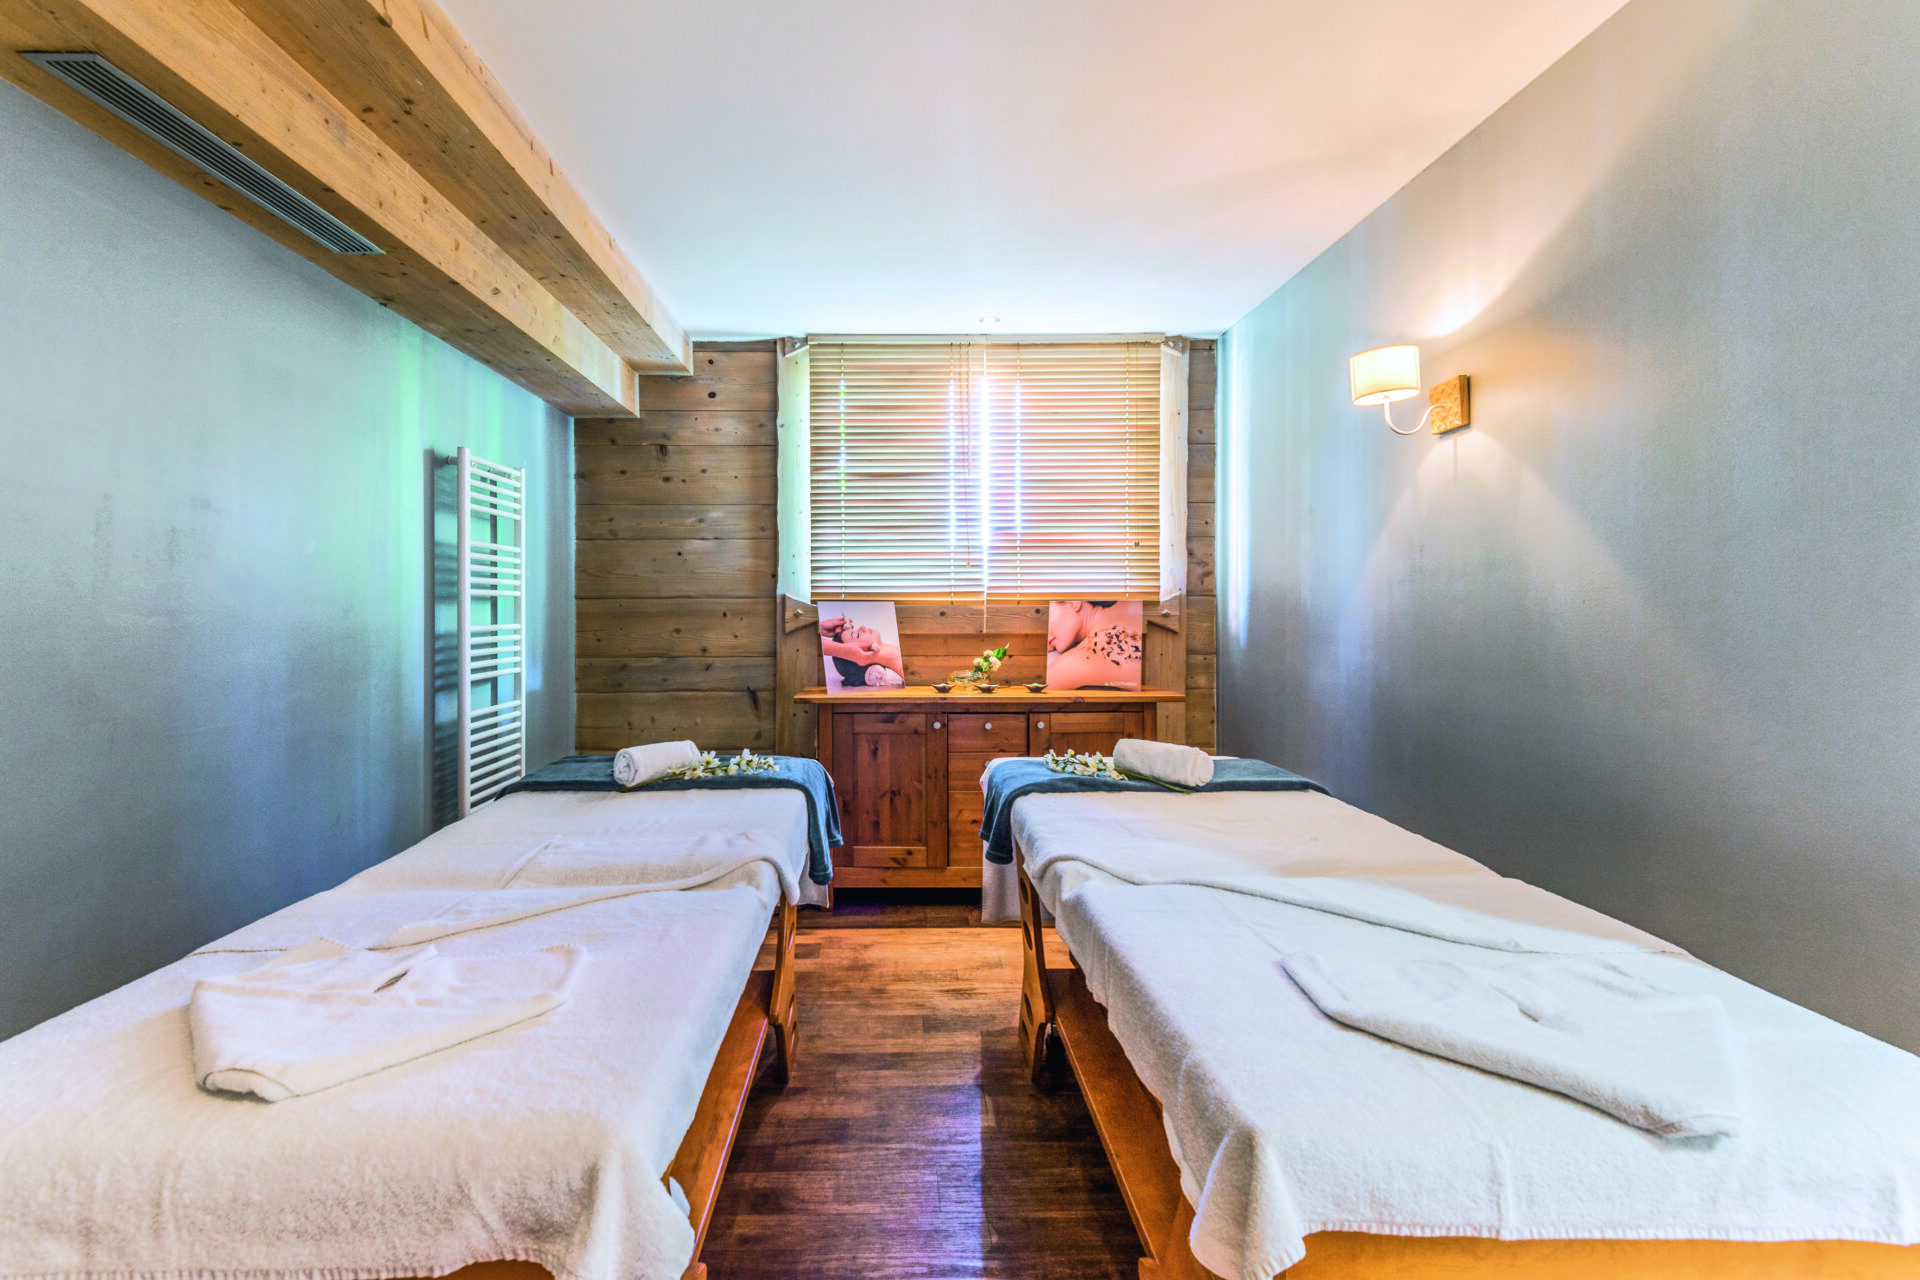 An image of the massage room at the residence